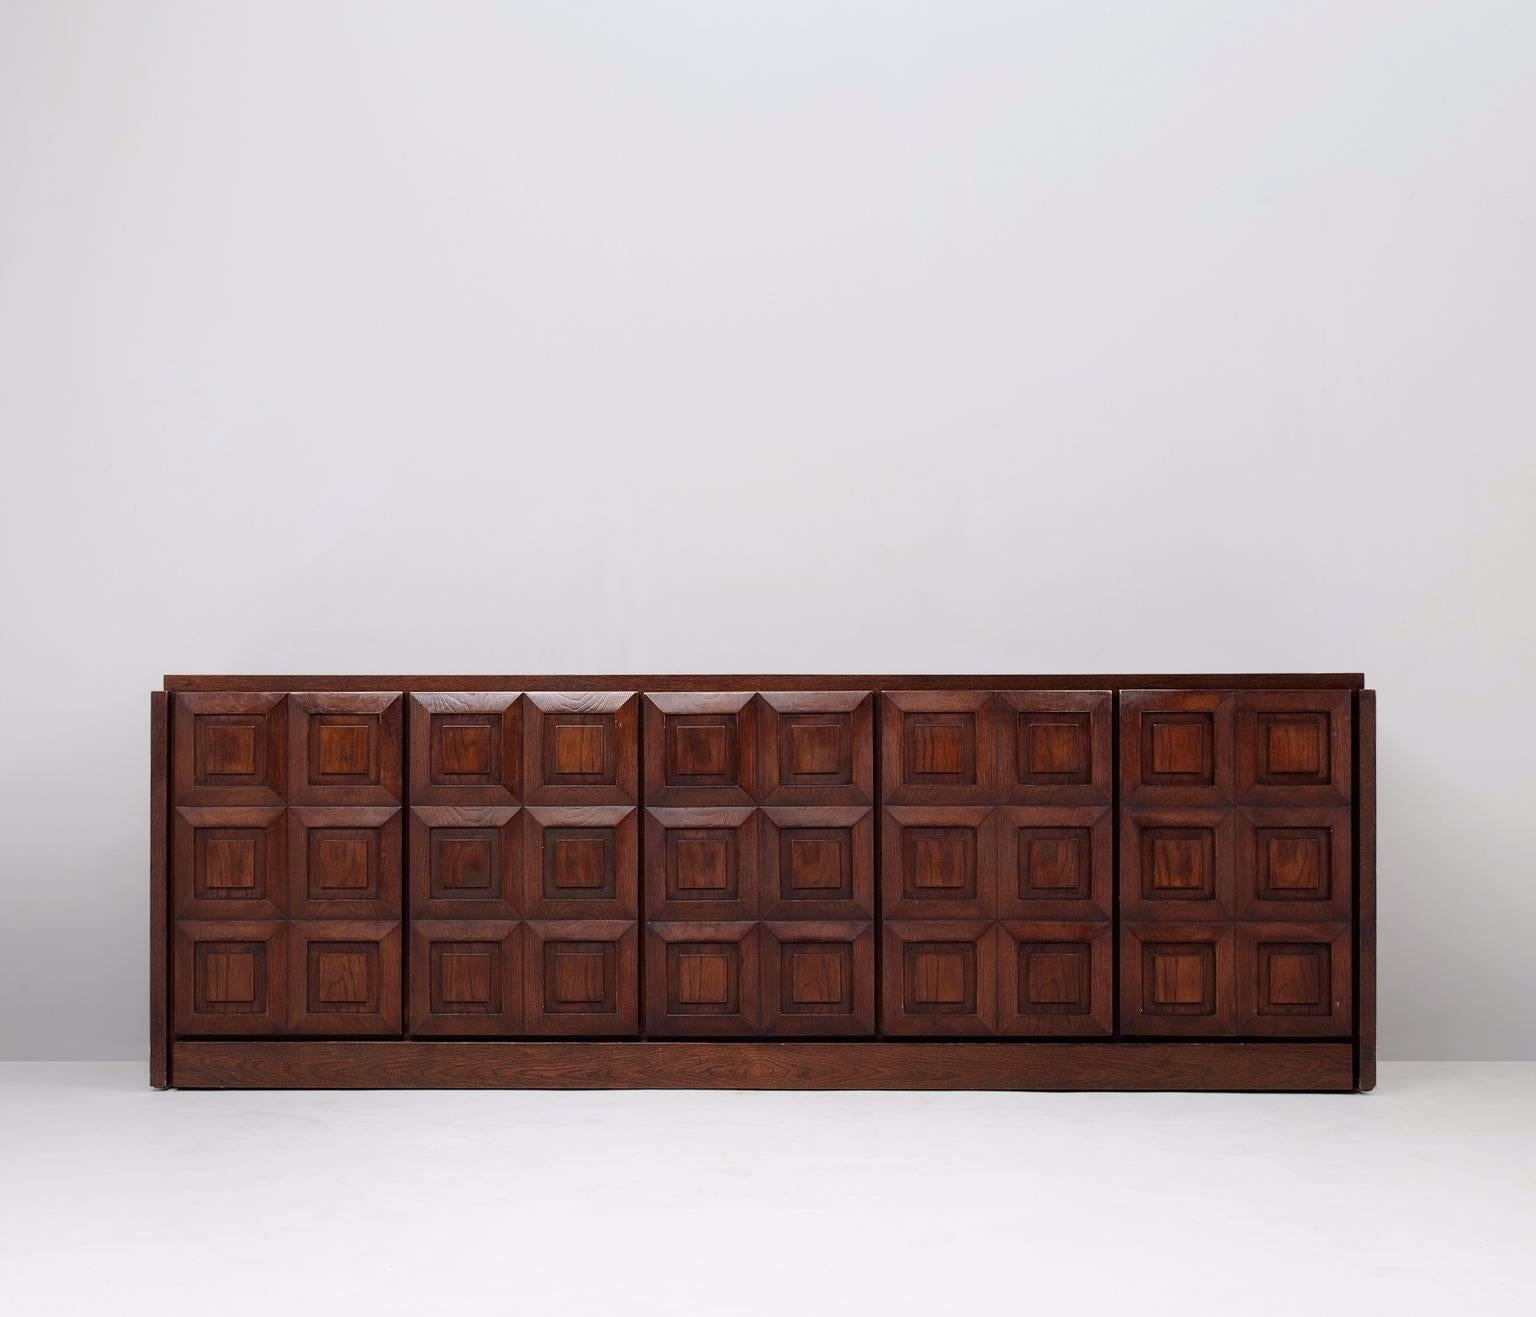 Brown Brutalist credenza, European 1970s.

Large Brutalist credenza in oak veneer with graphical designed doorpanels.
Five doorpanels, each with a three-dimensional pattern of six squares, which gives the cabinet a very strong expression.
 
The